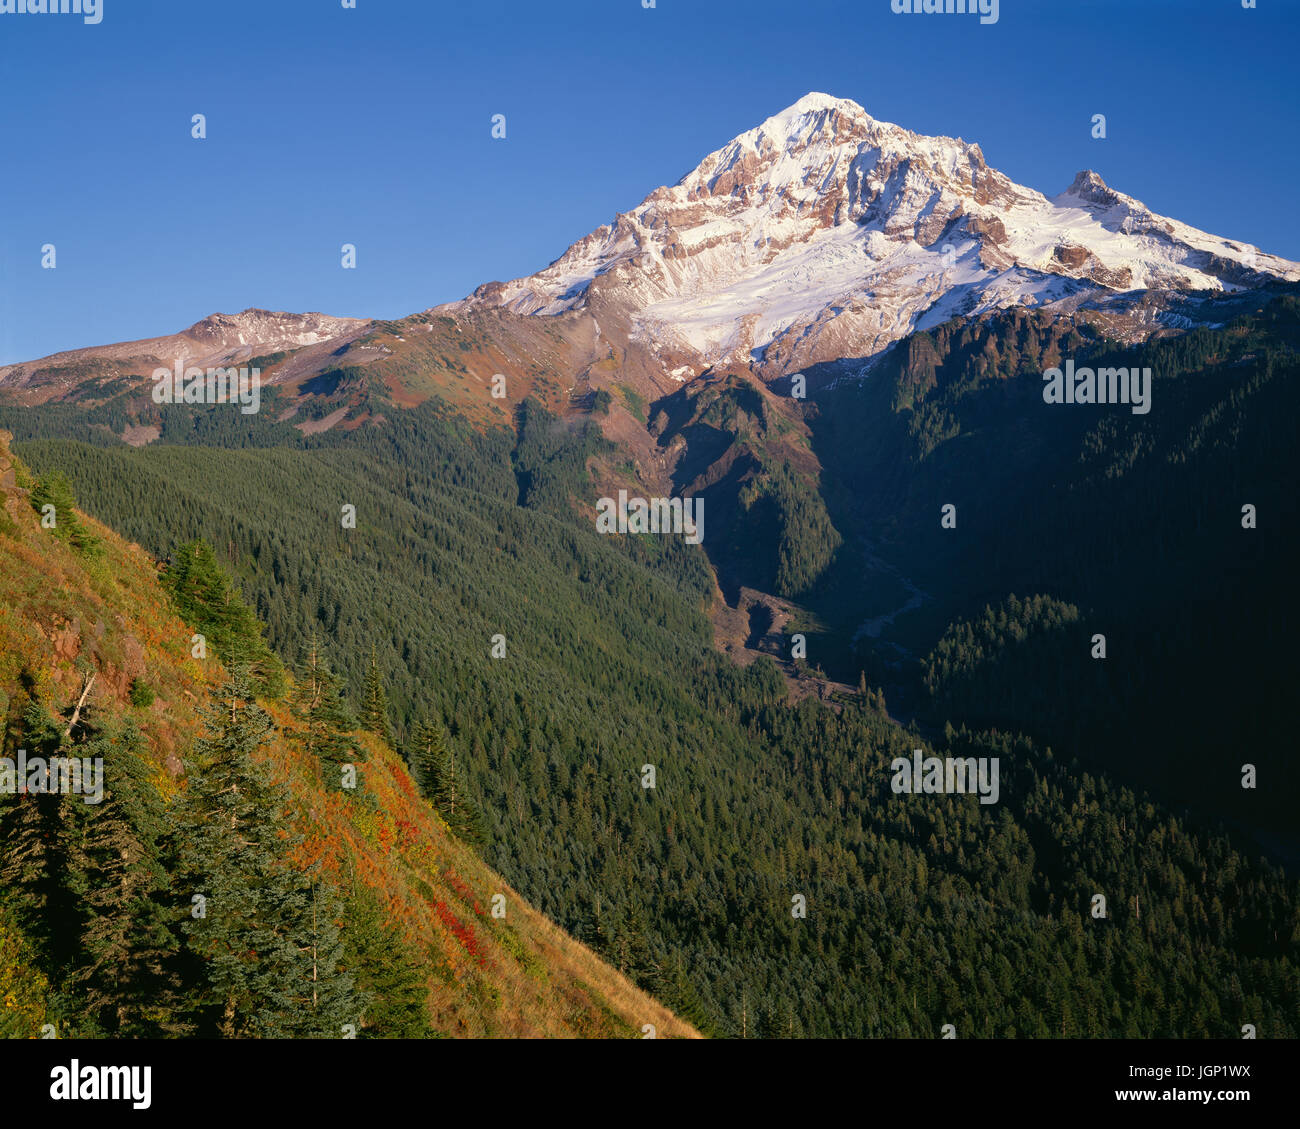 USA, Oregon, Mount Hood National Forest, Mount Hood Wilderness, West side of Mount Hood and autumn shrubs on slopes of Bald Mountain. Stock Photo